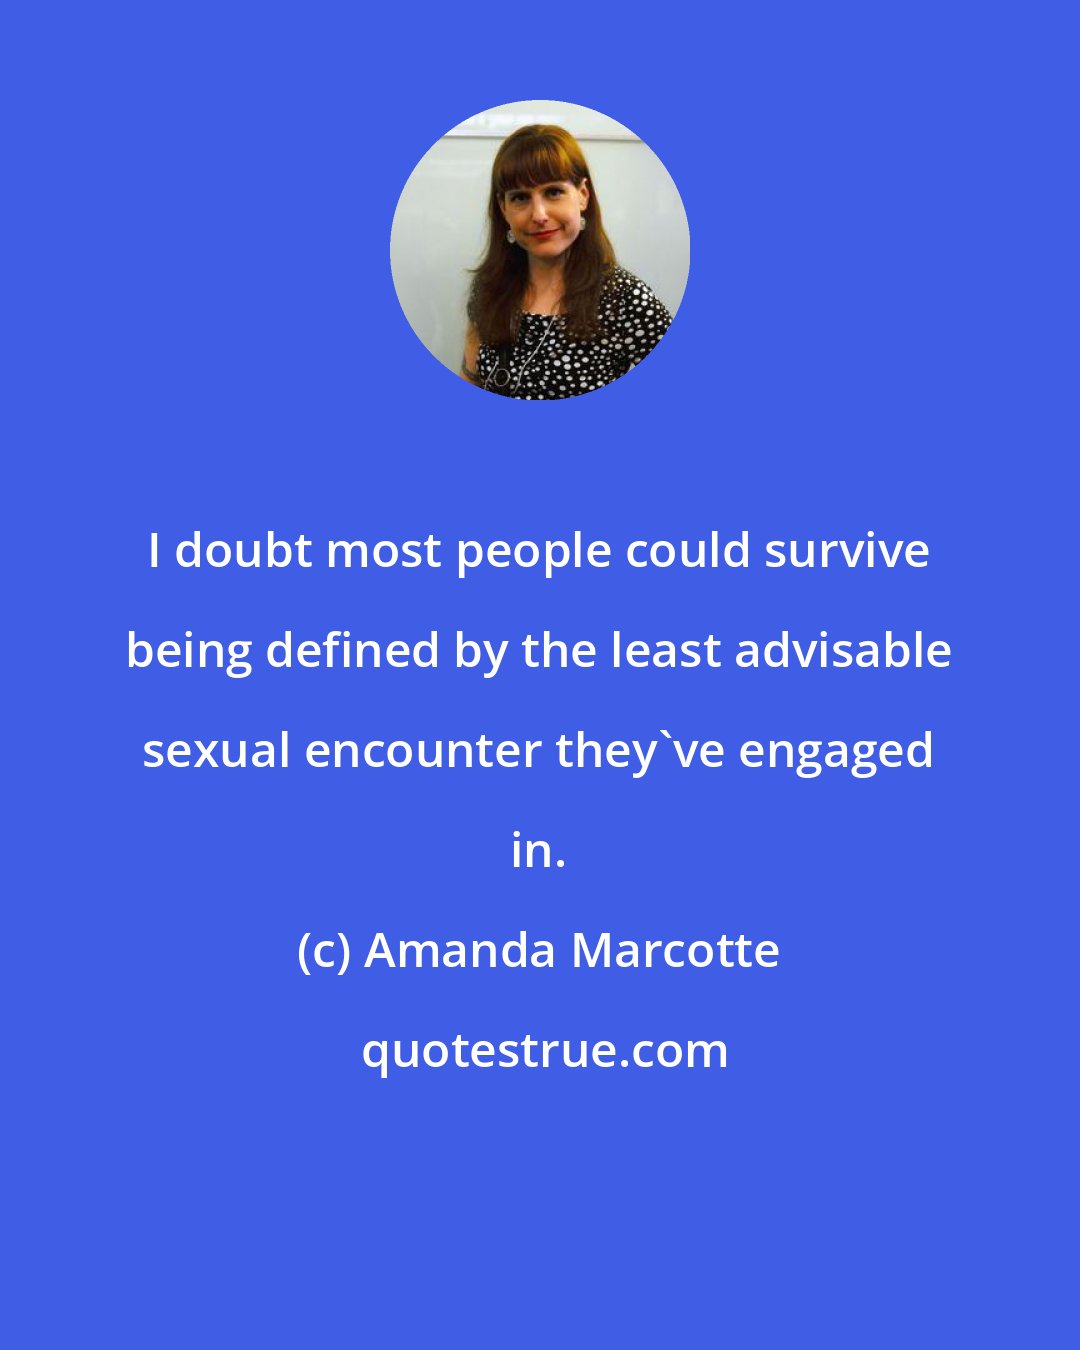 Amanda Marcotte: I doubt most people could survive being defined by the least advisable sexual encounter they've engaged in.